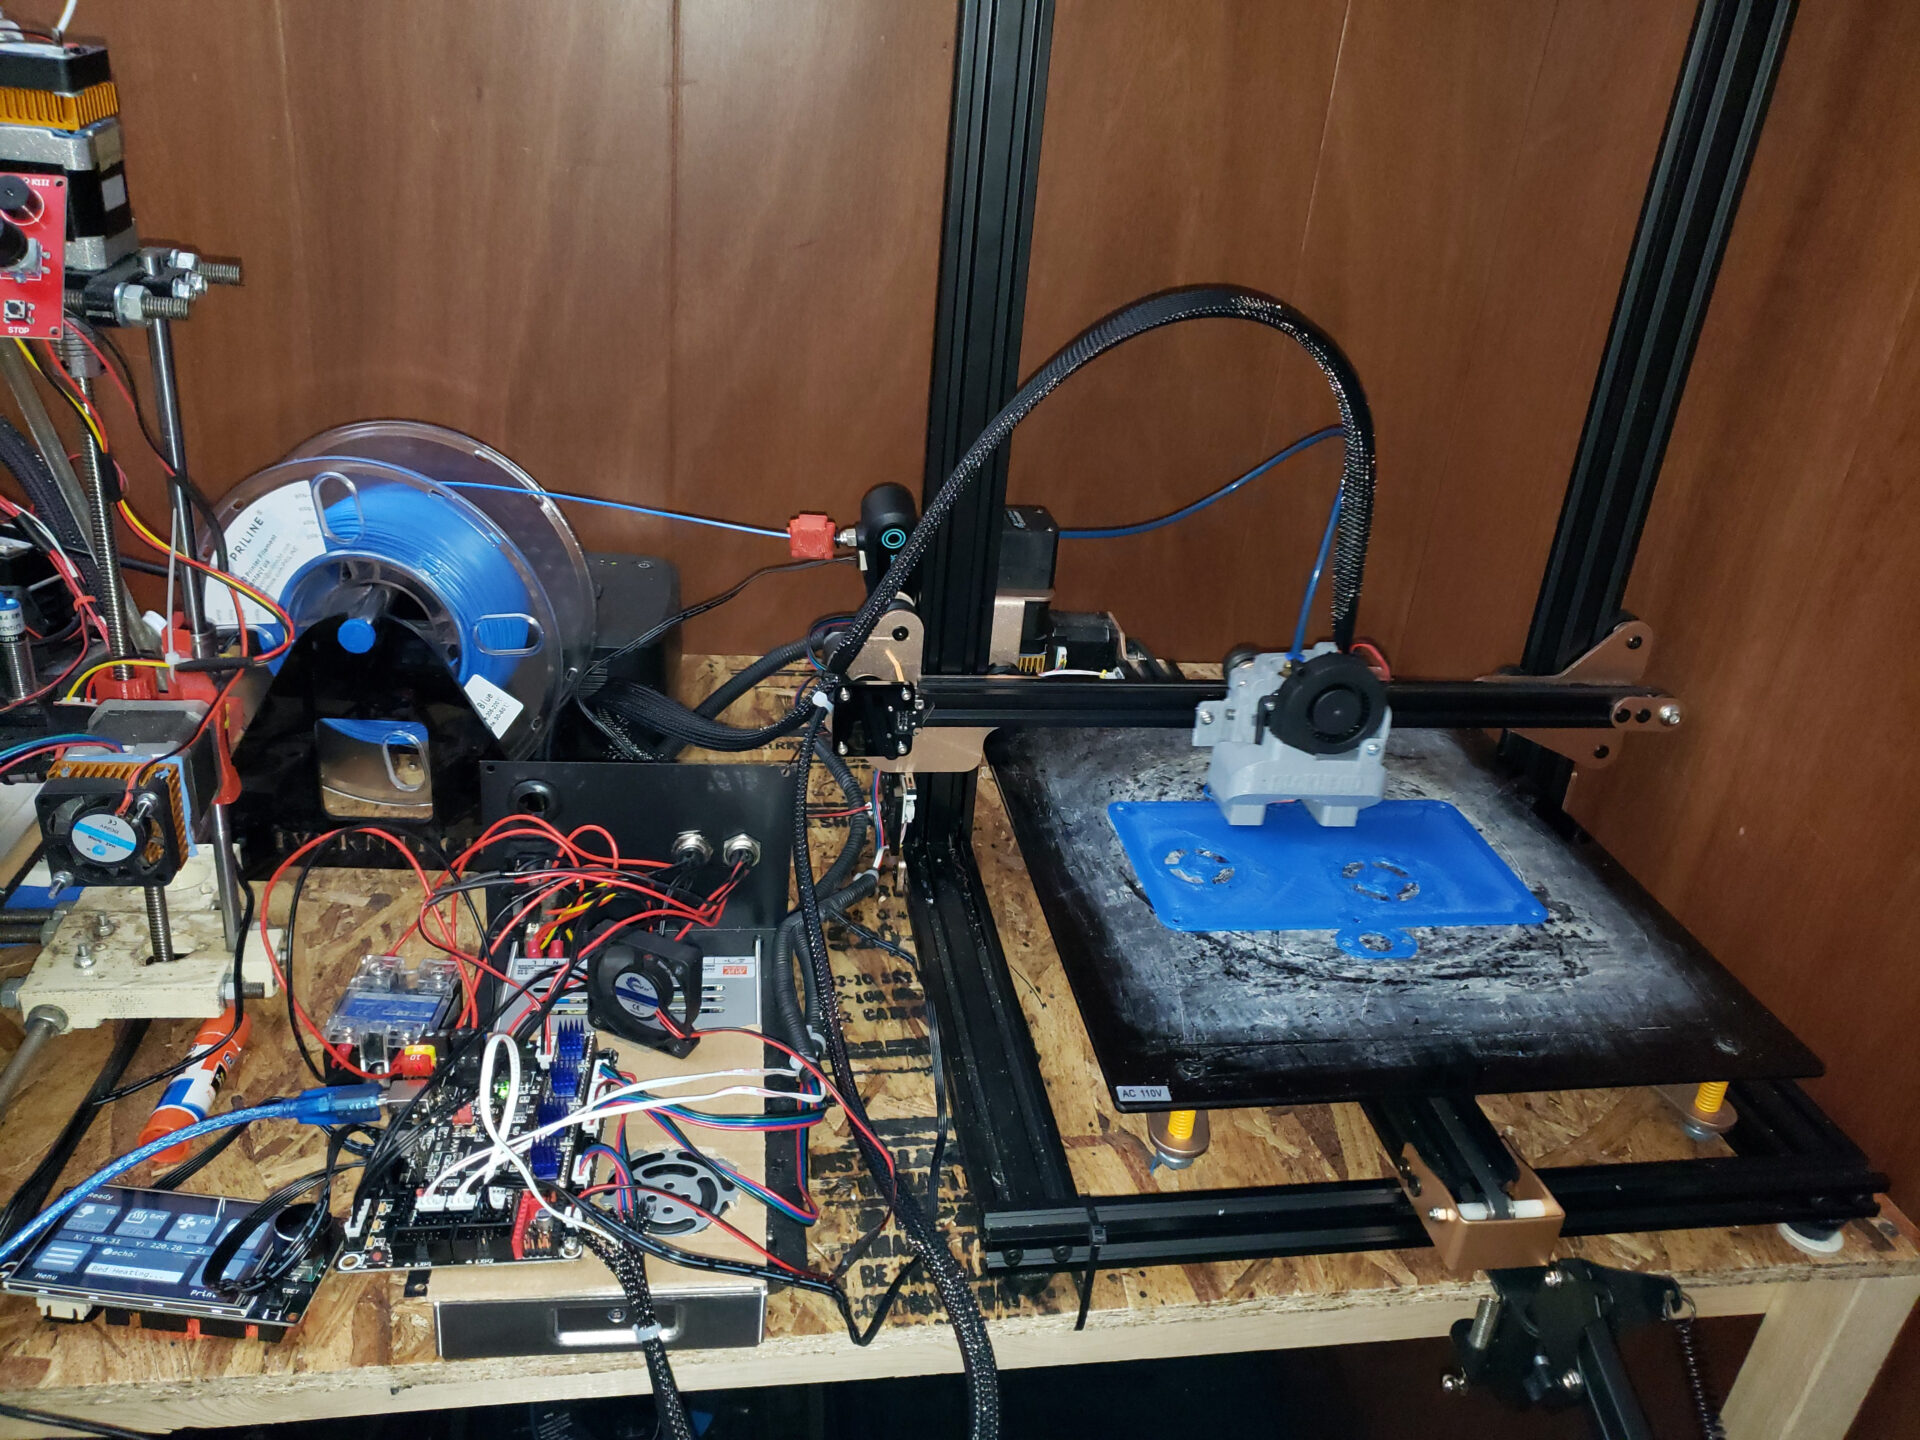 3D Printer Upgrades - WhatHaveWeLearned